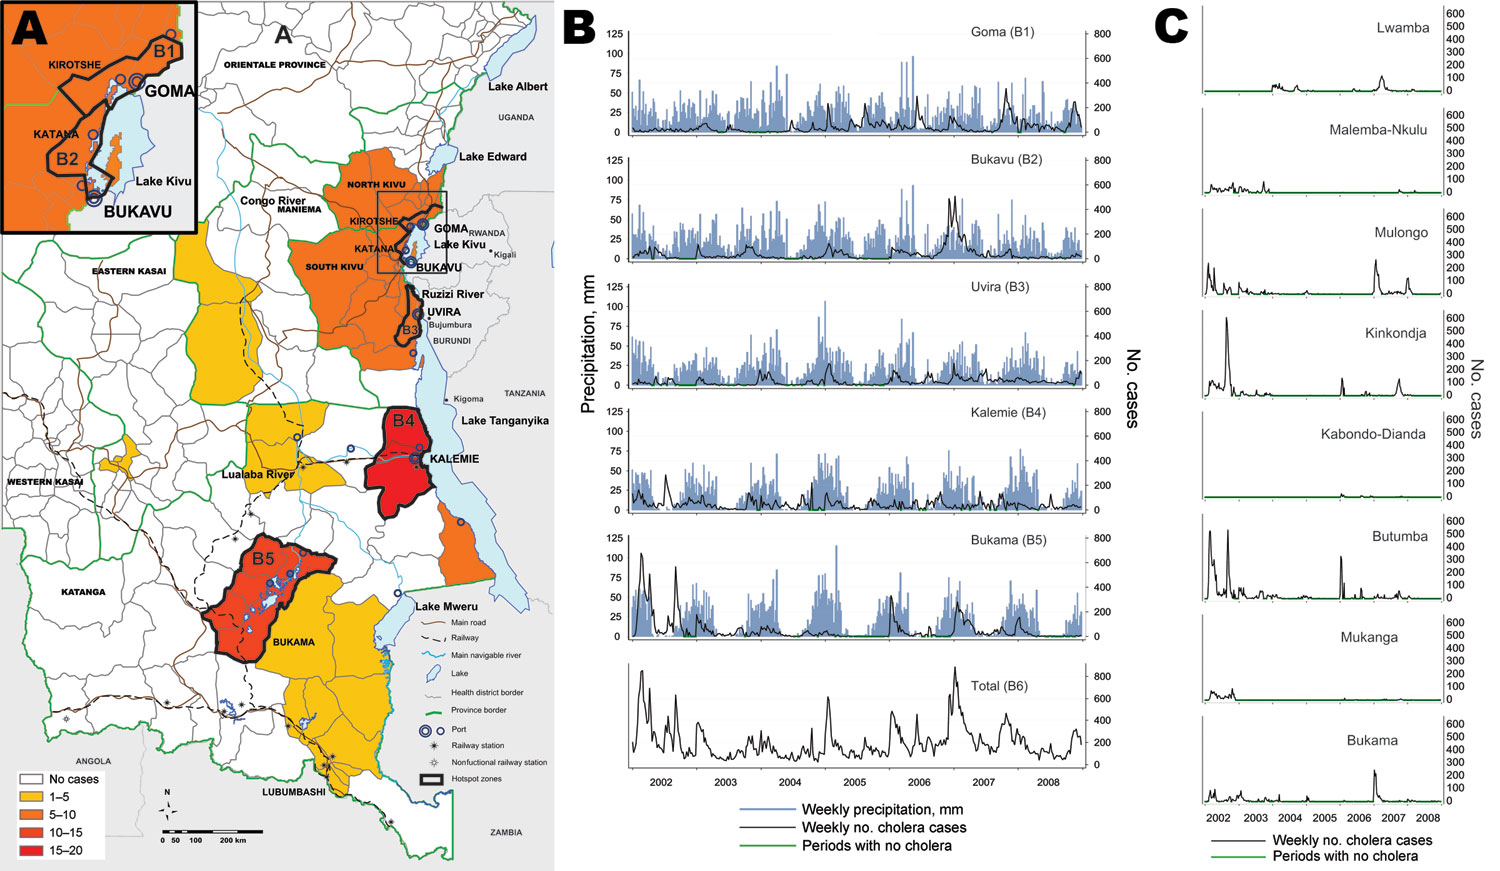 Temporal-spatial evolution of cholera cases in 5 hotspots in the African Great Lakes region, 2002–2008. A) Spatial distribution of cholera in the provinces of Katanga, North Kivu, and South Kivu (Democratic Republic of Congo). Health districts are colored according to the risk ratio of the cluster, as calculated by using SatSCan software (Kulldorf, Cambridge, UK). B) Evolution of the weekly number of cholera cases in the 5 hotspots (B1–B5). B1) Goma and Kirotshe health districts; B2) Bukavu and 